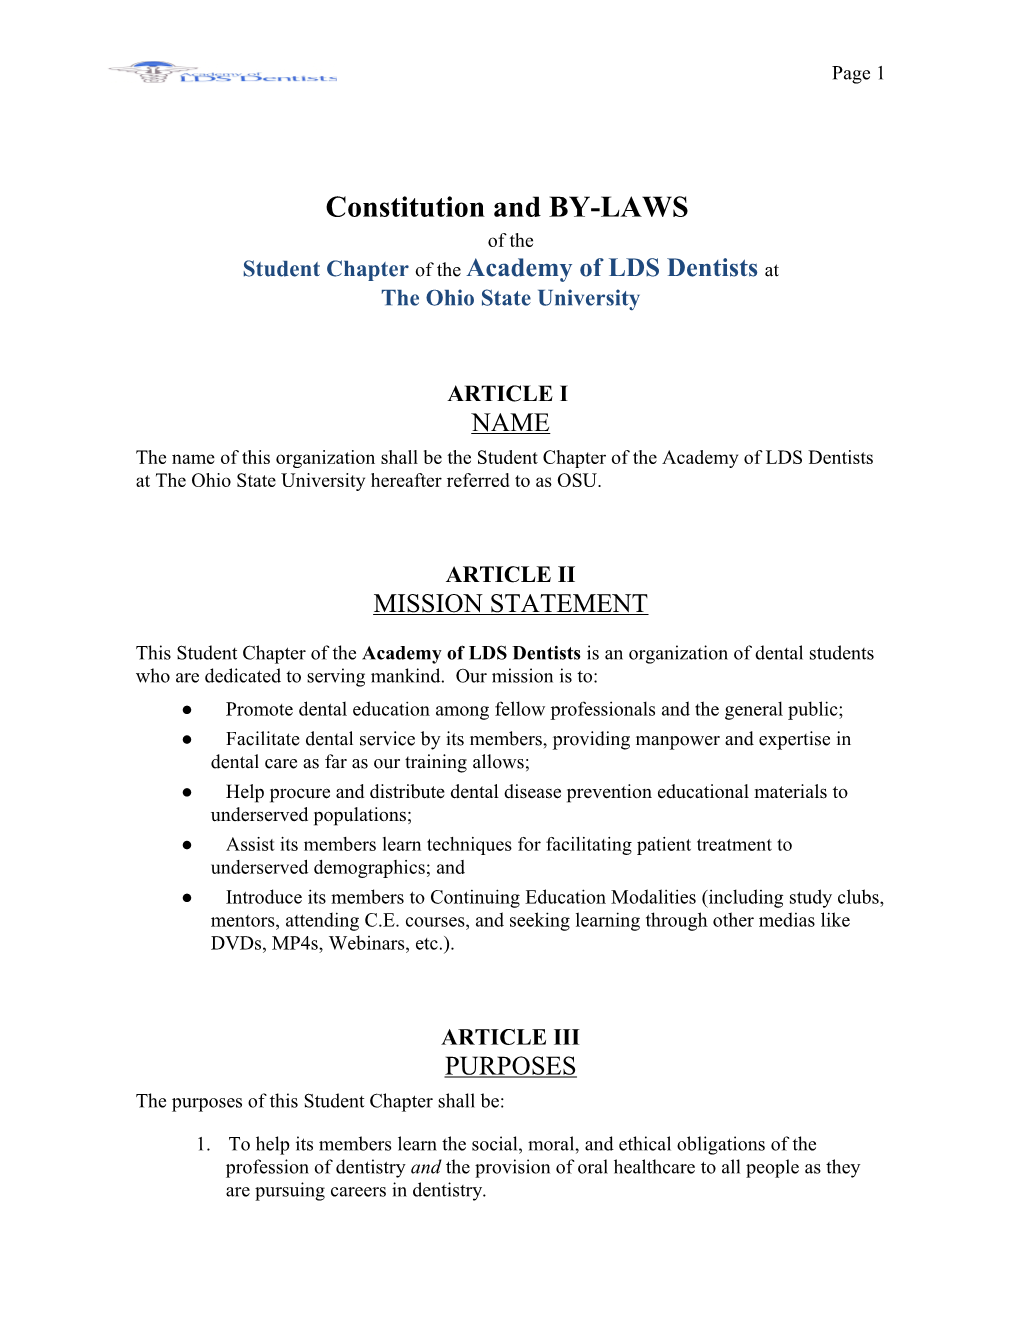 FINAL Bylaws for Student Chapters 01-15-2014 (1)